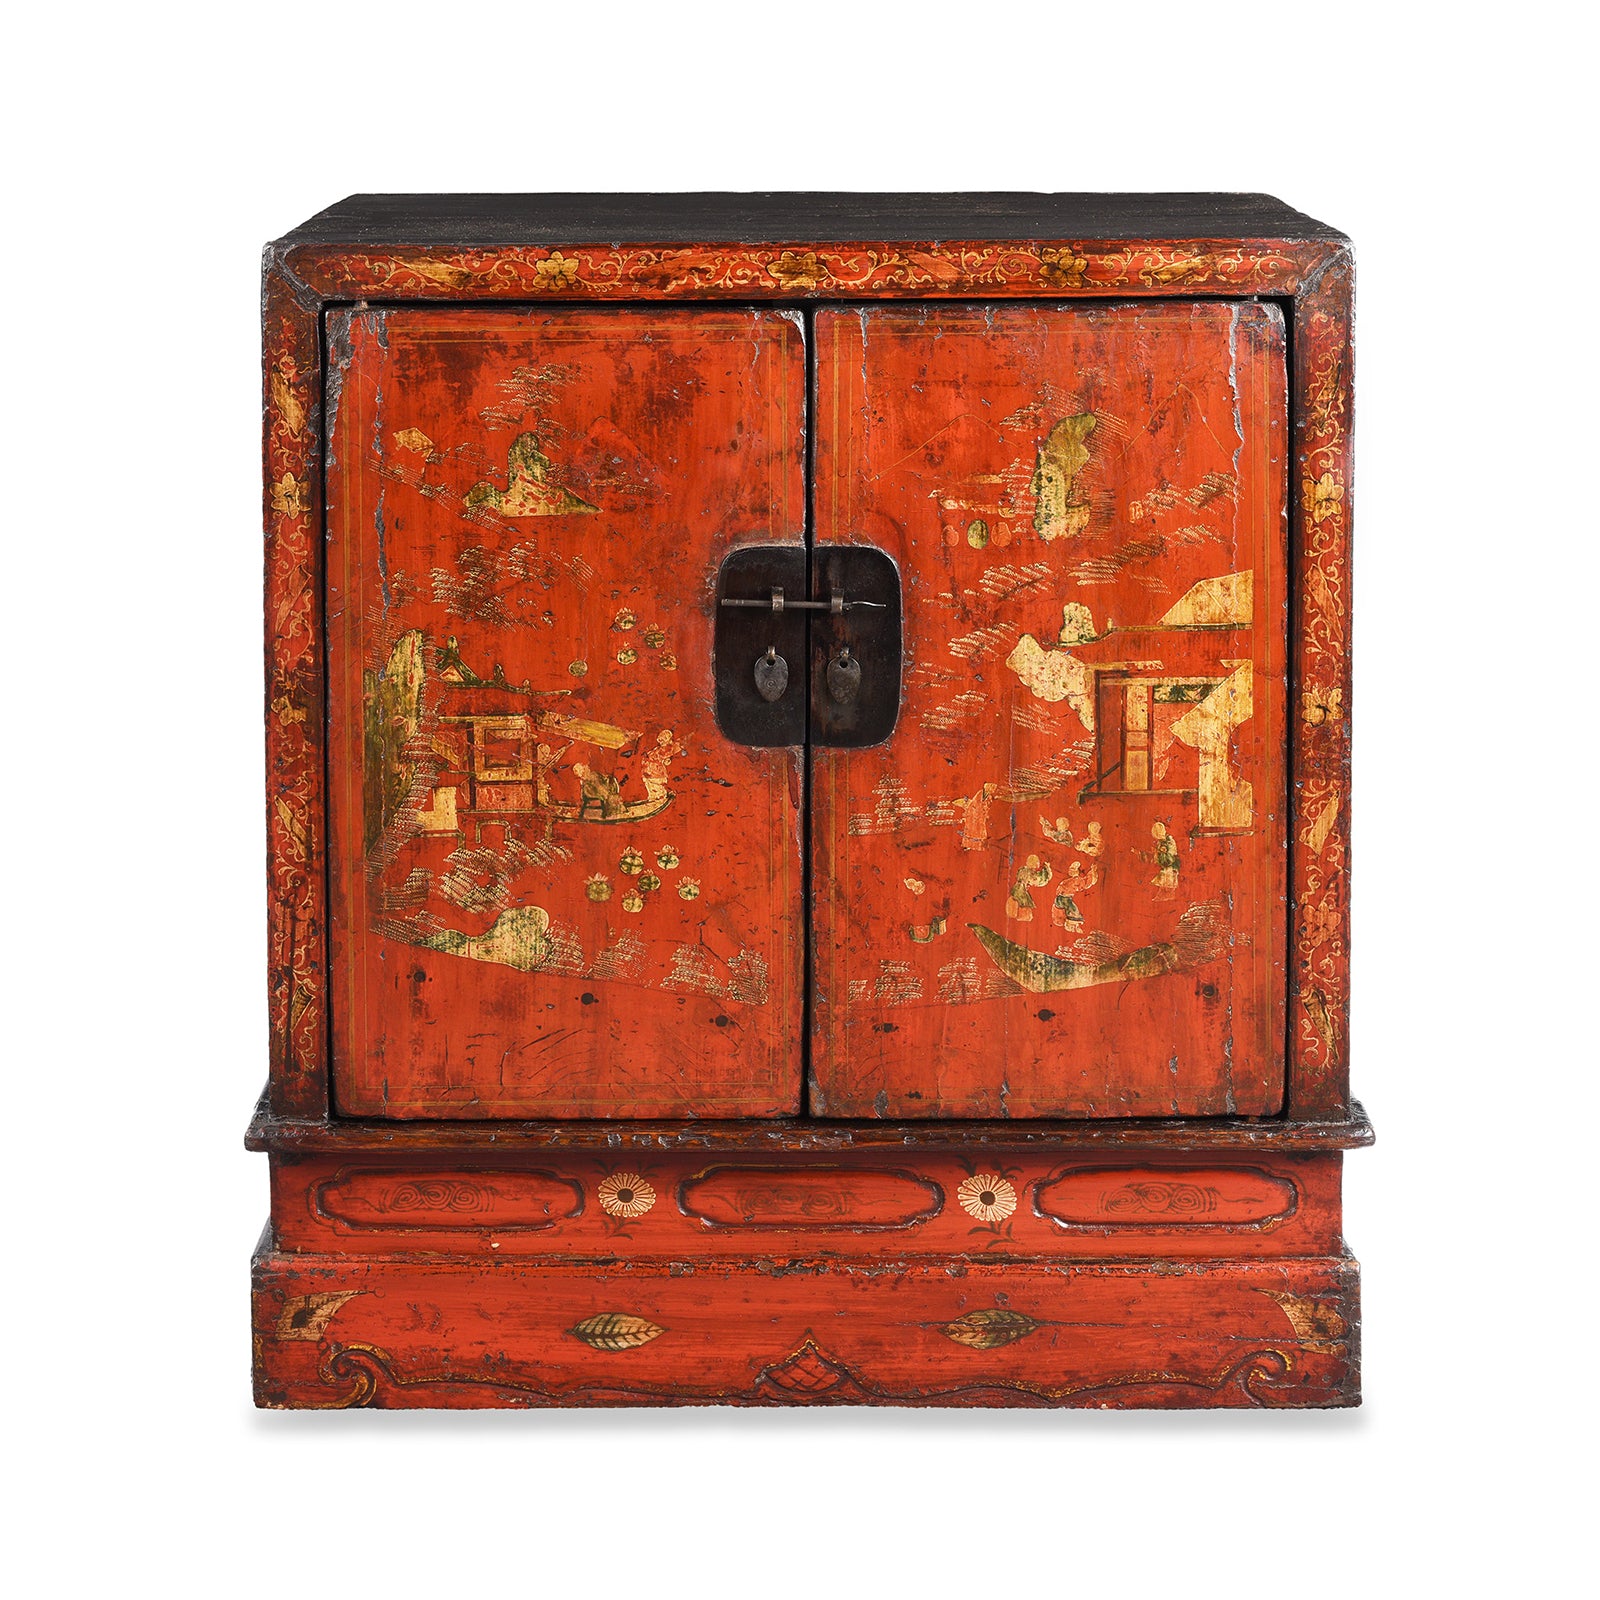 Antique Chinese Red Lacquer Book Cabinet From Shanxi - 19th Century | Indigo Antiques